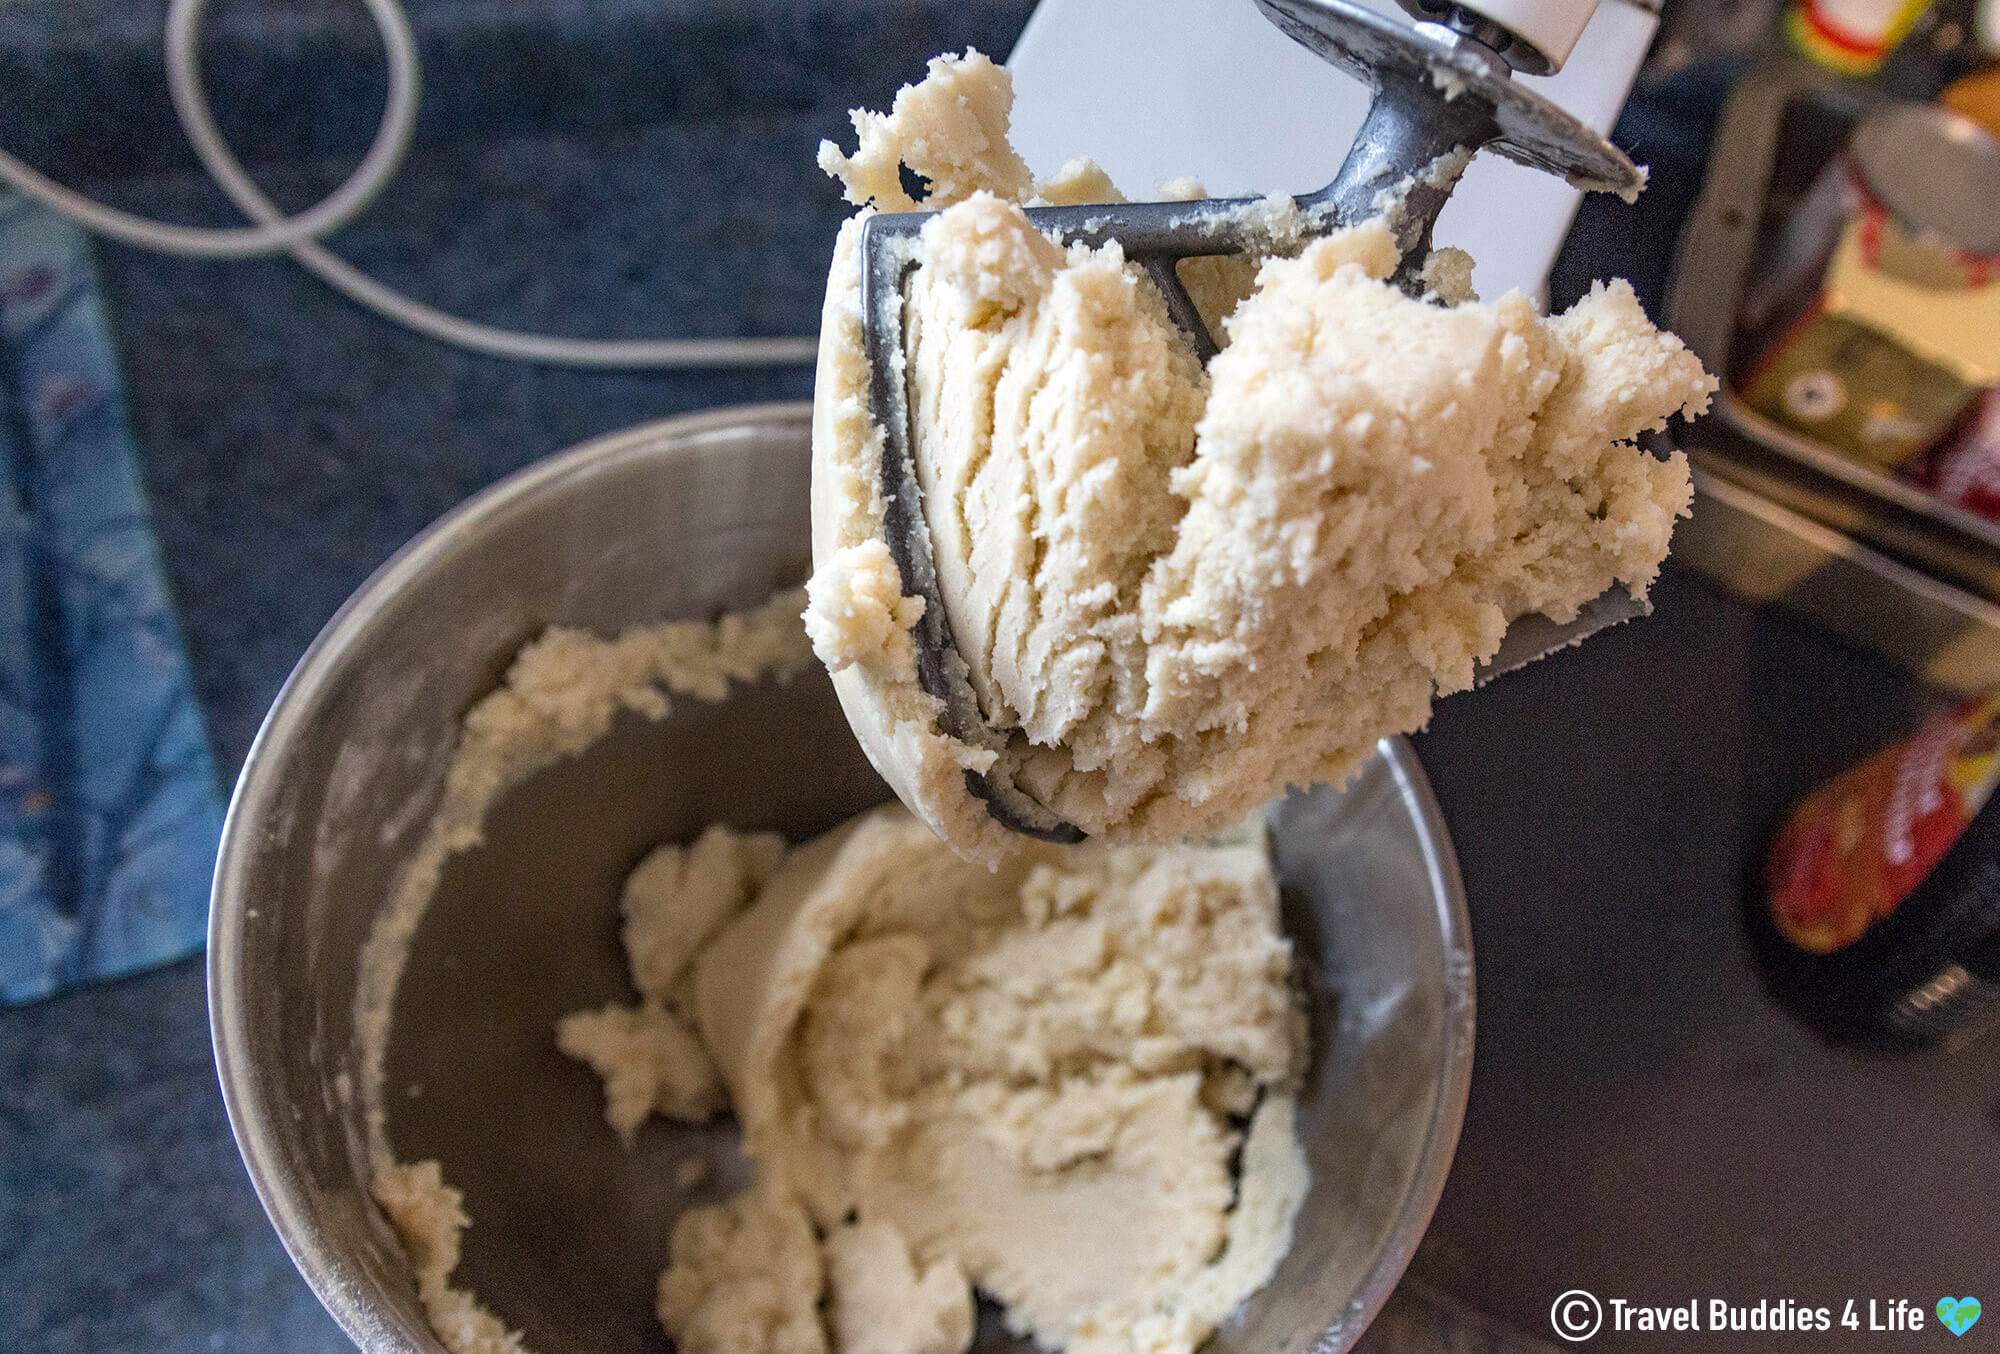 A Mixing Bowl Filled With Christmas Cookie Dough To Make Sand Dollar Cookies